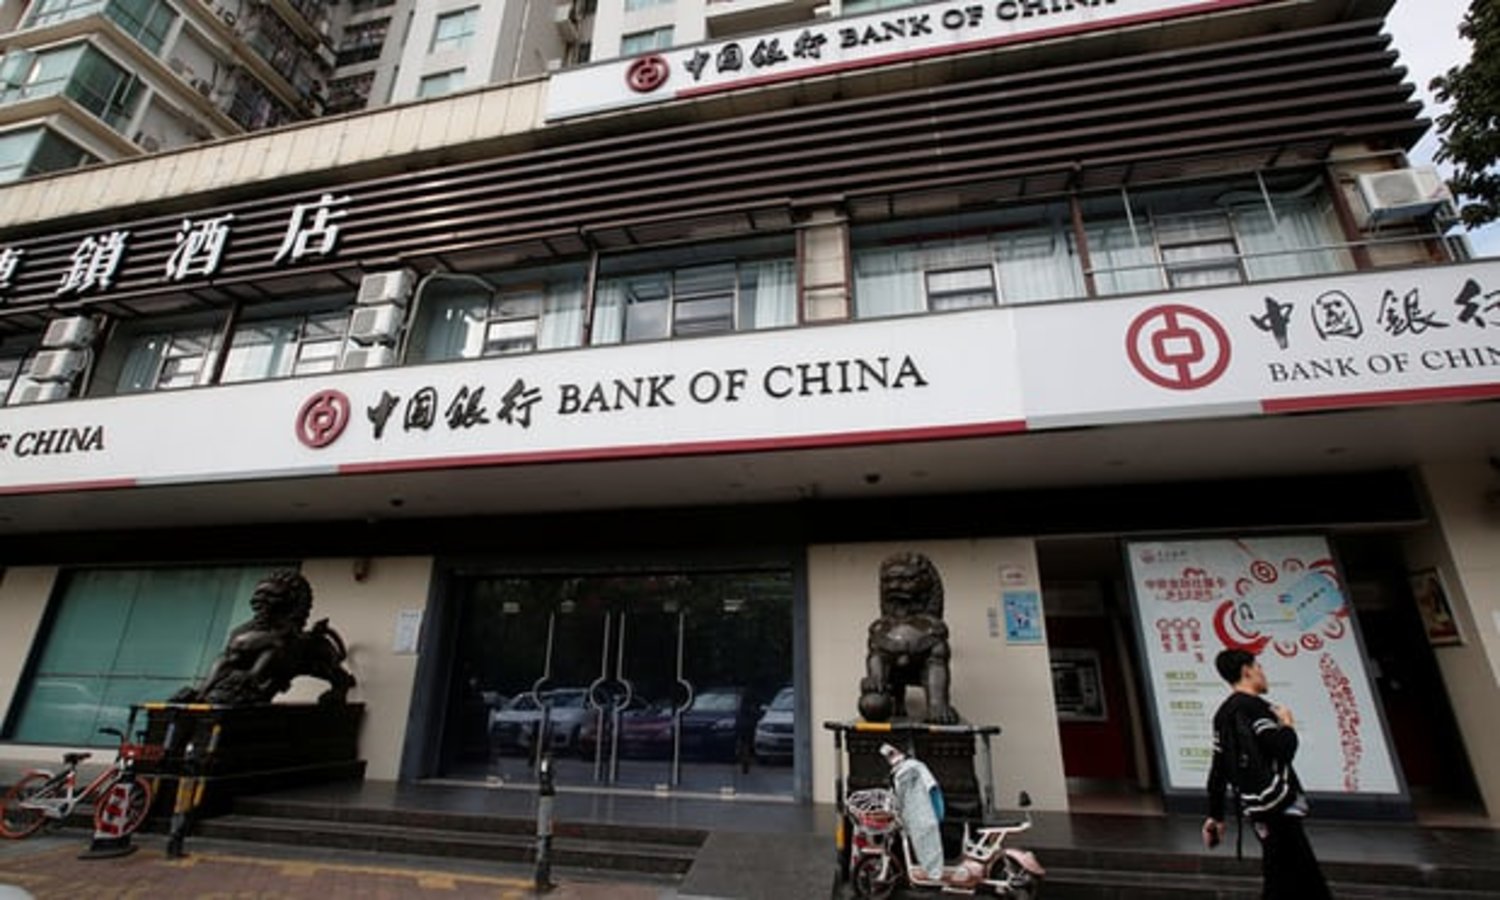  Financial security and supervision of banks in China has improved, says the IMF, but ‘risky lending’ is happening in other quarters. Photograph: Reuters